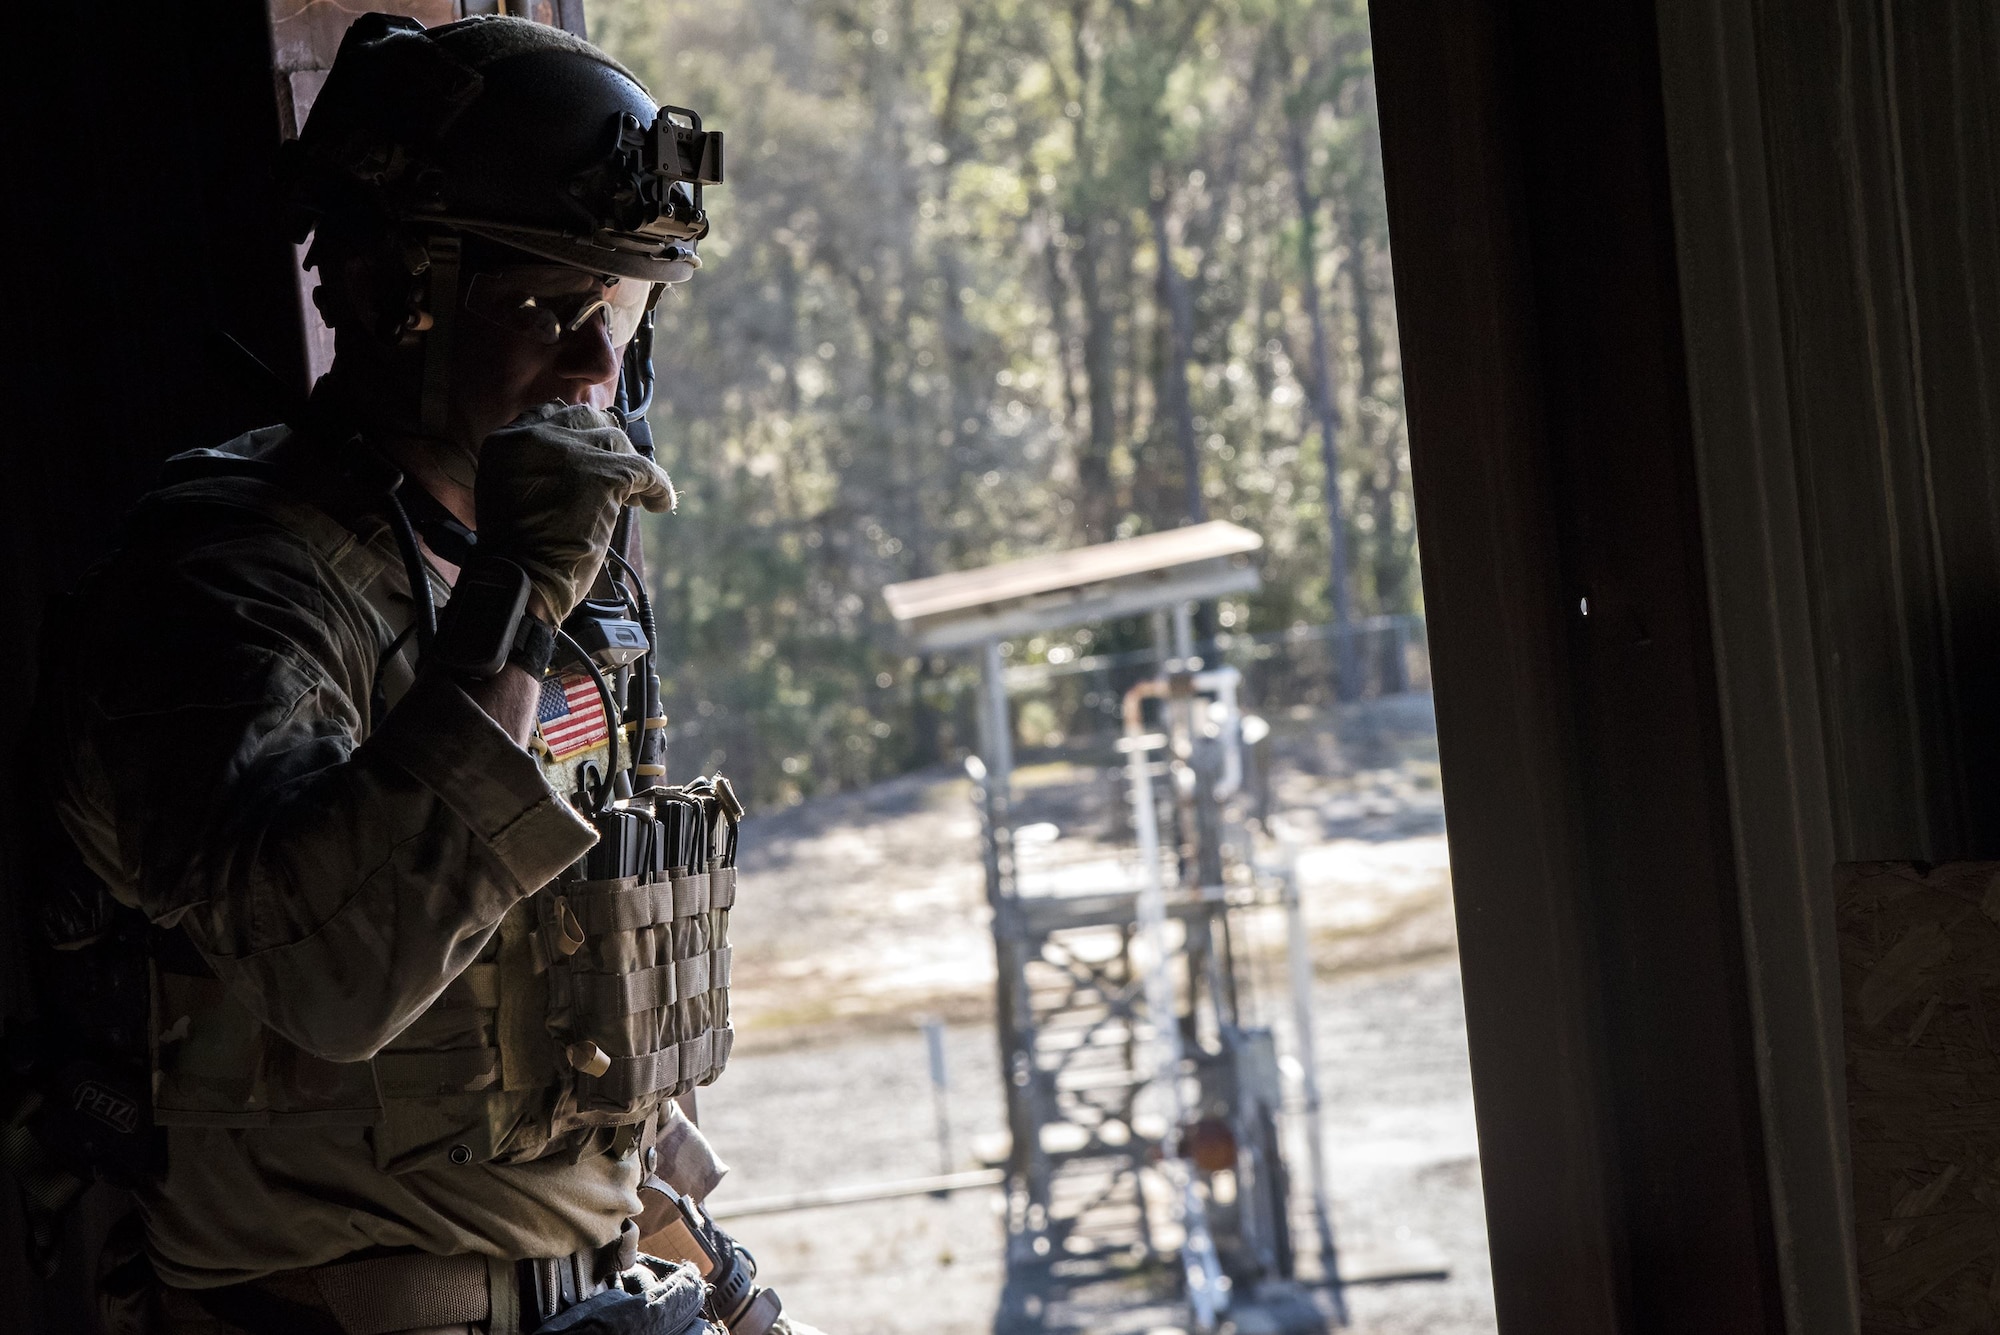 A pararesueman from the 38th Rescue Squadron (RQS) speaks on a radio during a full mission profile exercise, Dec. 12, 2017, at Moody Air Force Base, Ga. During the training, the 38th RQS recovered victims while under enemy fire to prepare for future search and rescue missions and to assess their unit’s ability to work cohesively to accomplish the mission. (U.S. Air Force photo by Airman Eugene Oliver)